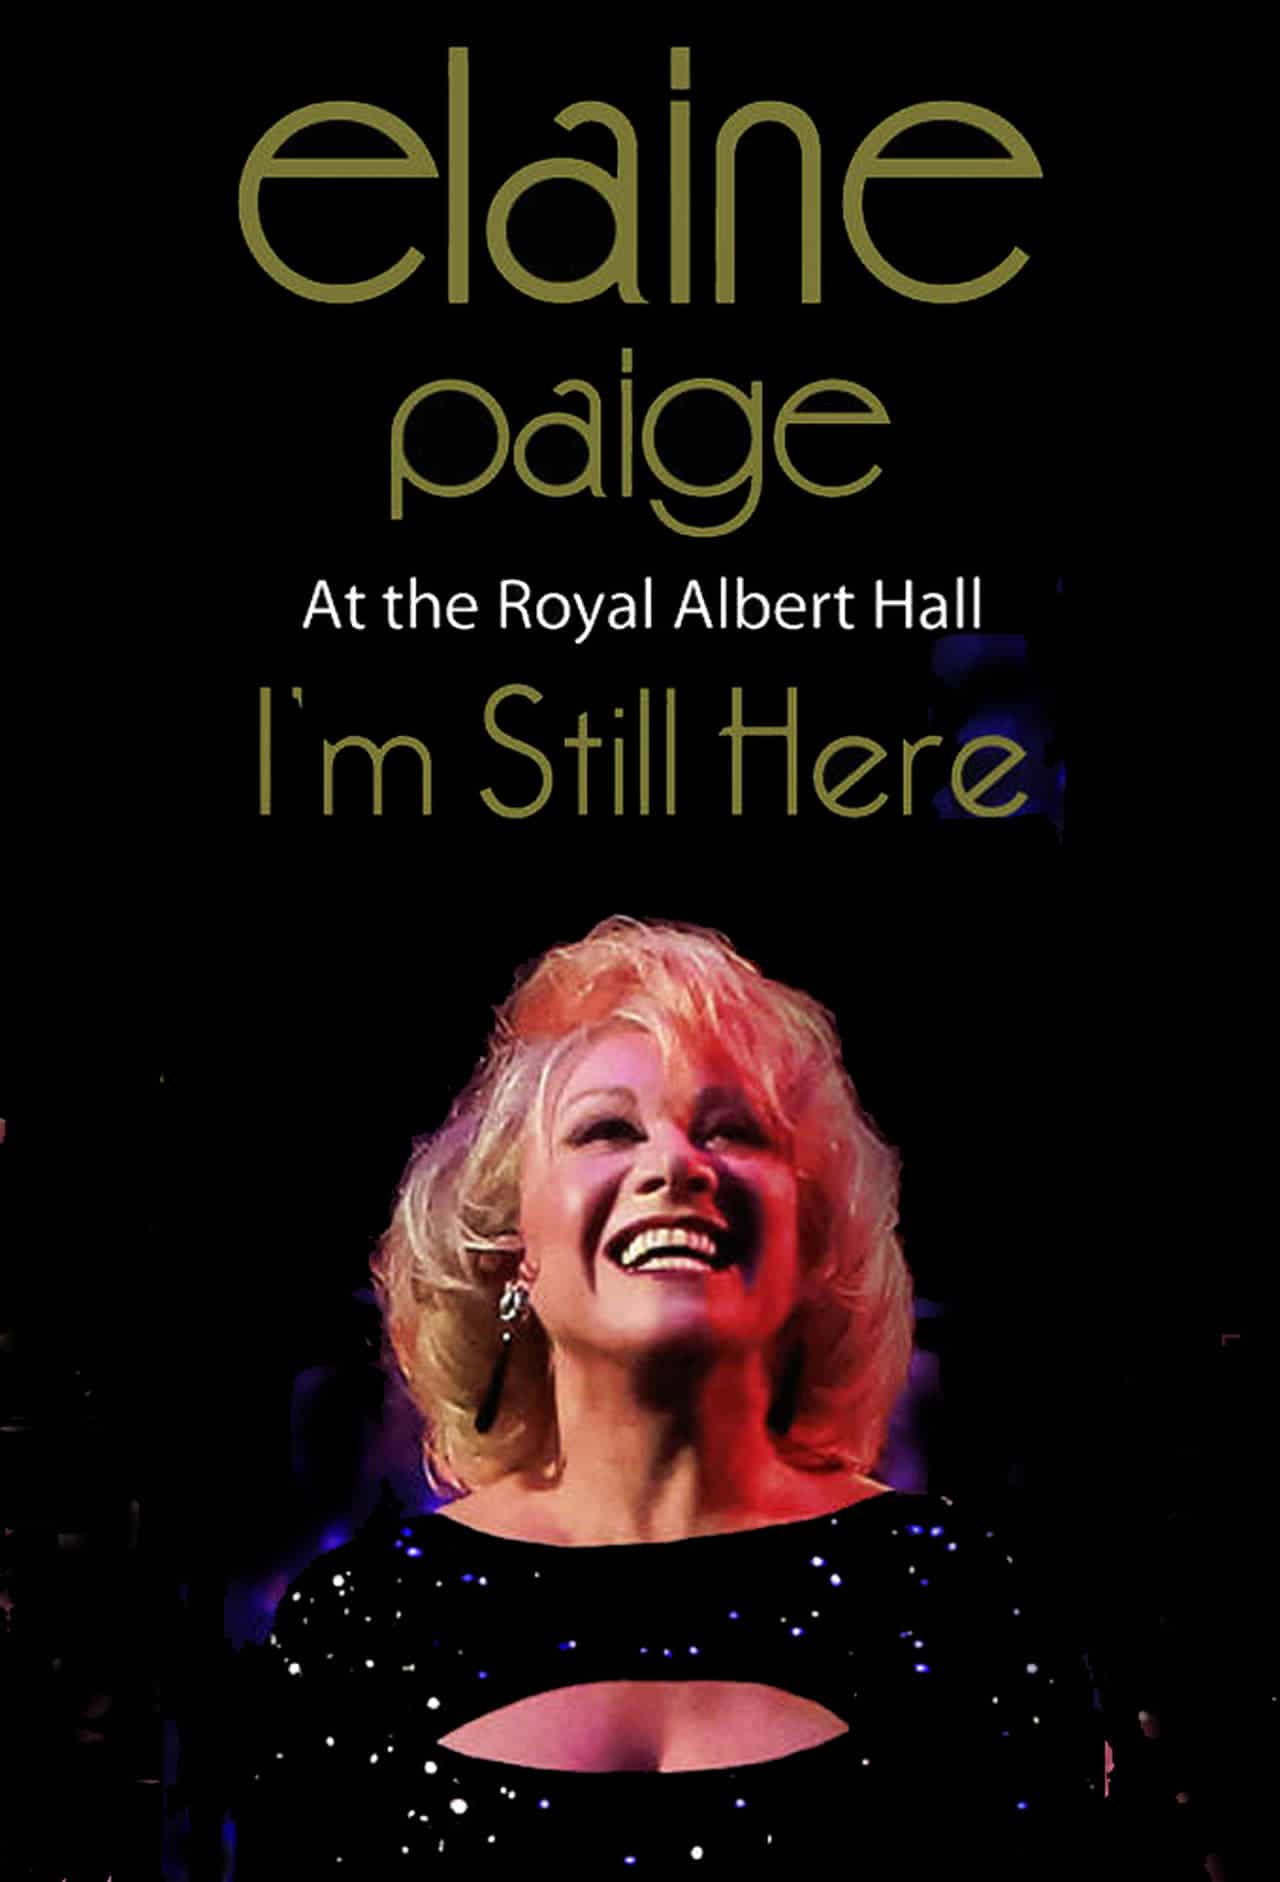 Elaine Paige From the Royal Albert Hall